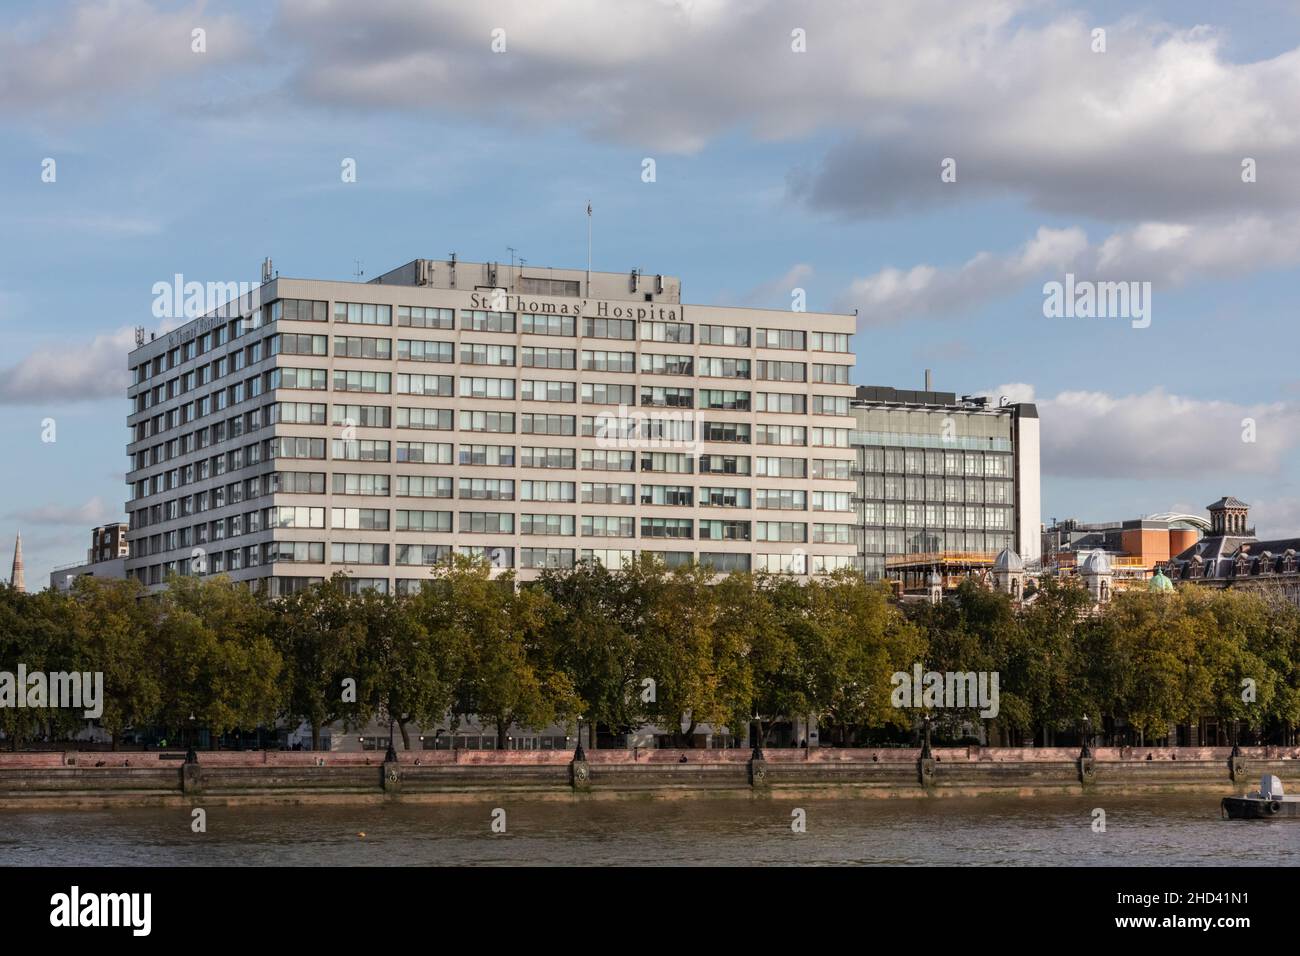 St Thomas' Hospital, large NHS hospital building on the River Thames in central London, England, UK Stock Photo